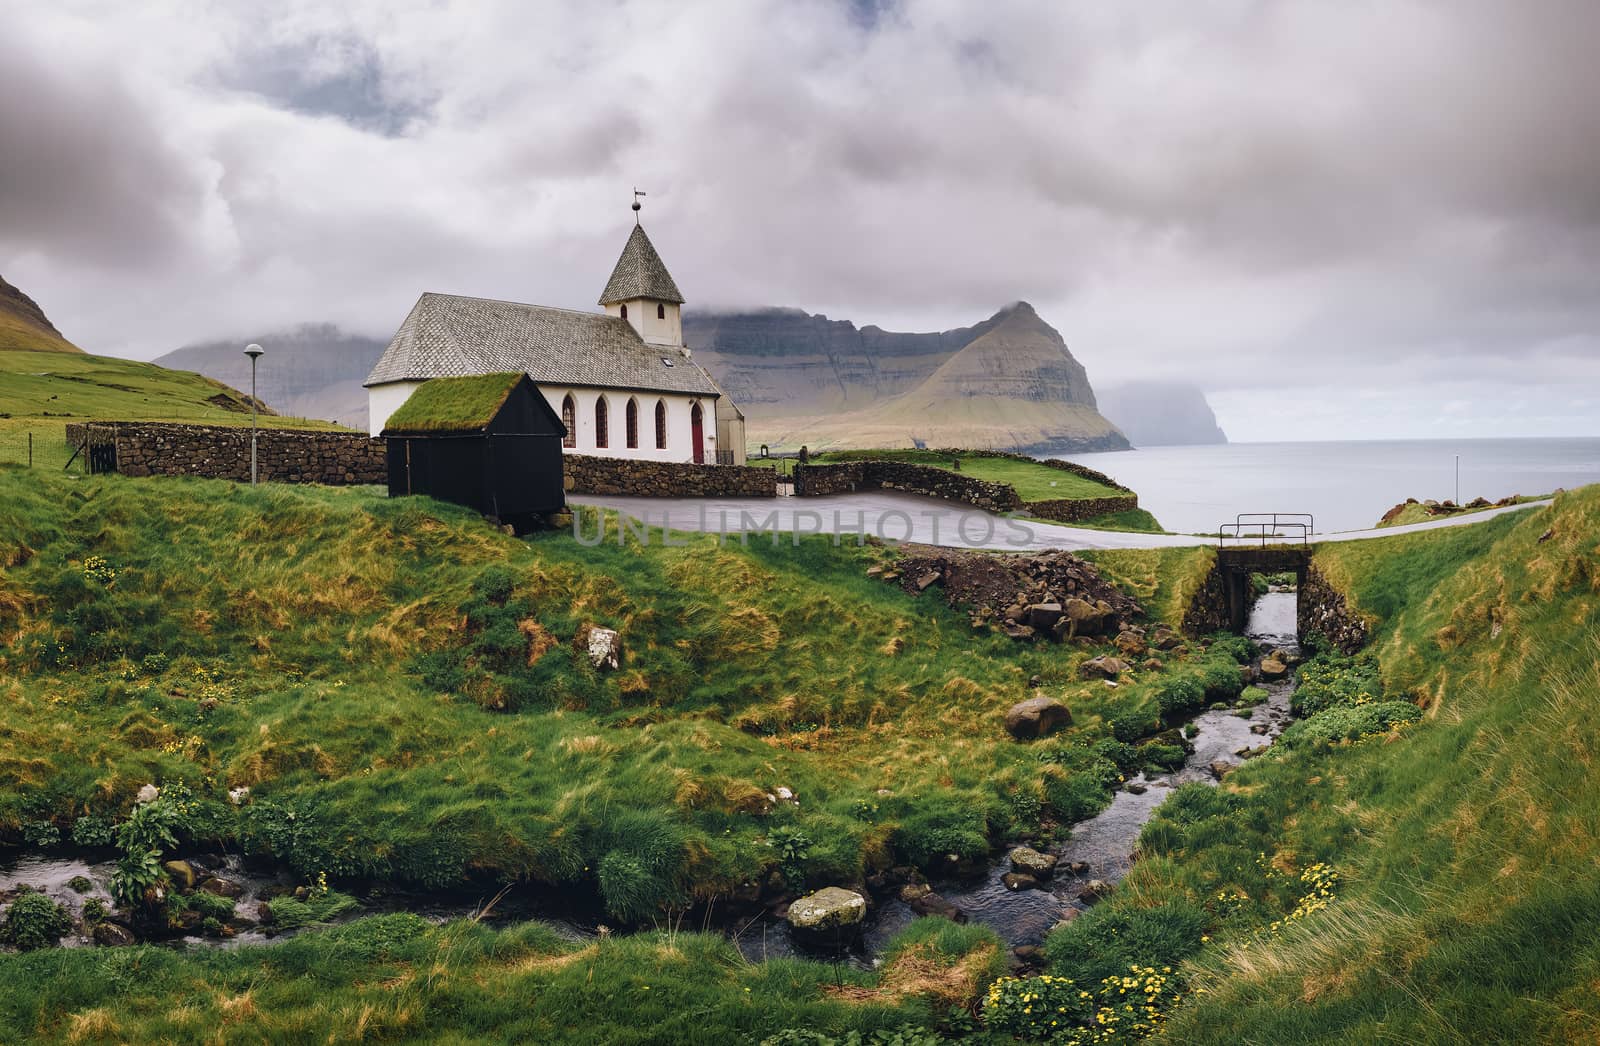 Small church in the village of Vidareidi situated on the sea shore. Vidareidi is the northernmost settlement in the Faroe Islands and lies on the Island of Vidoy.